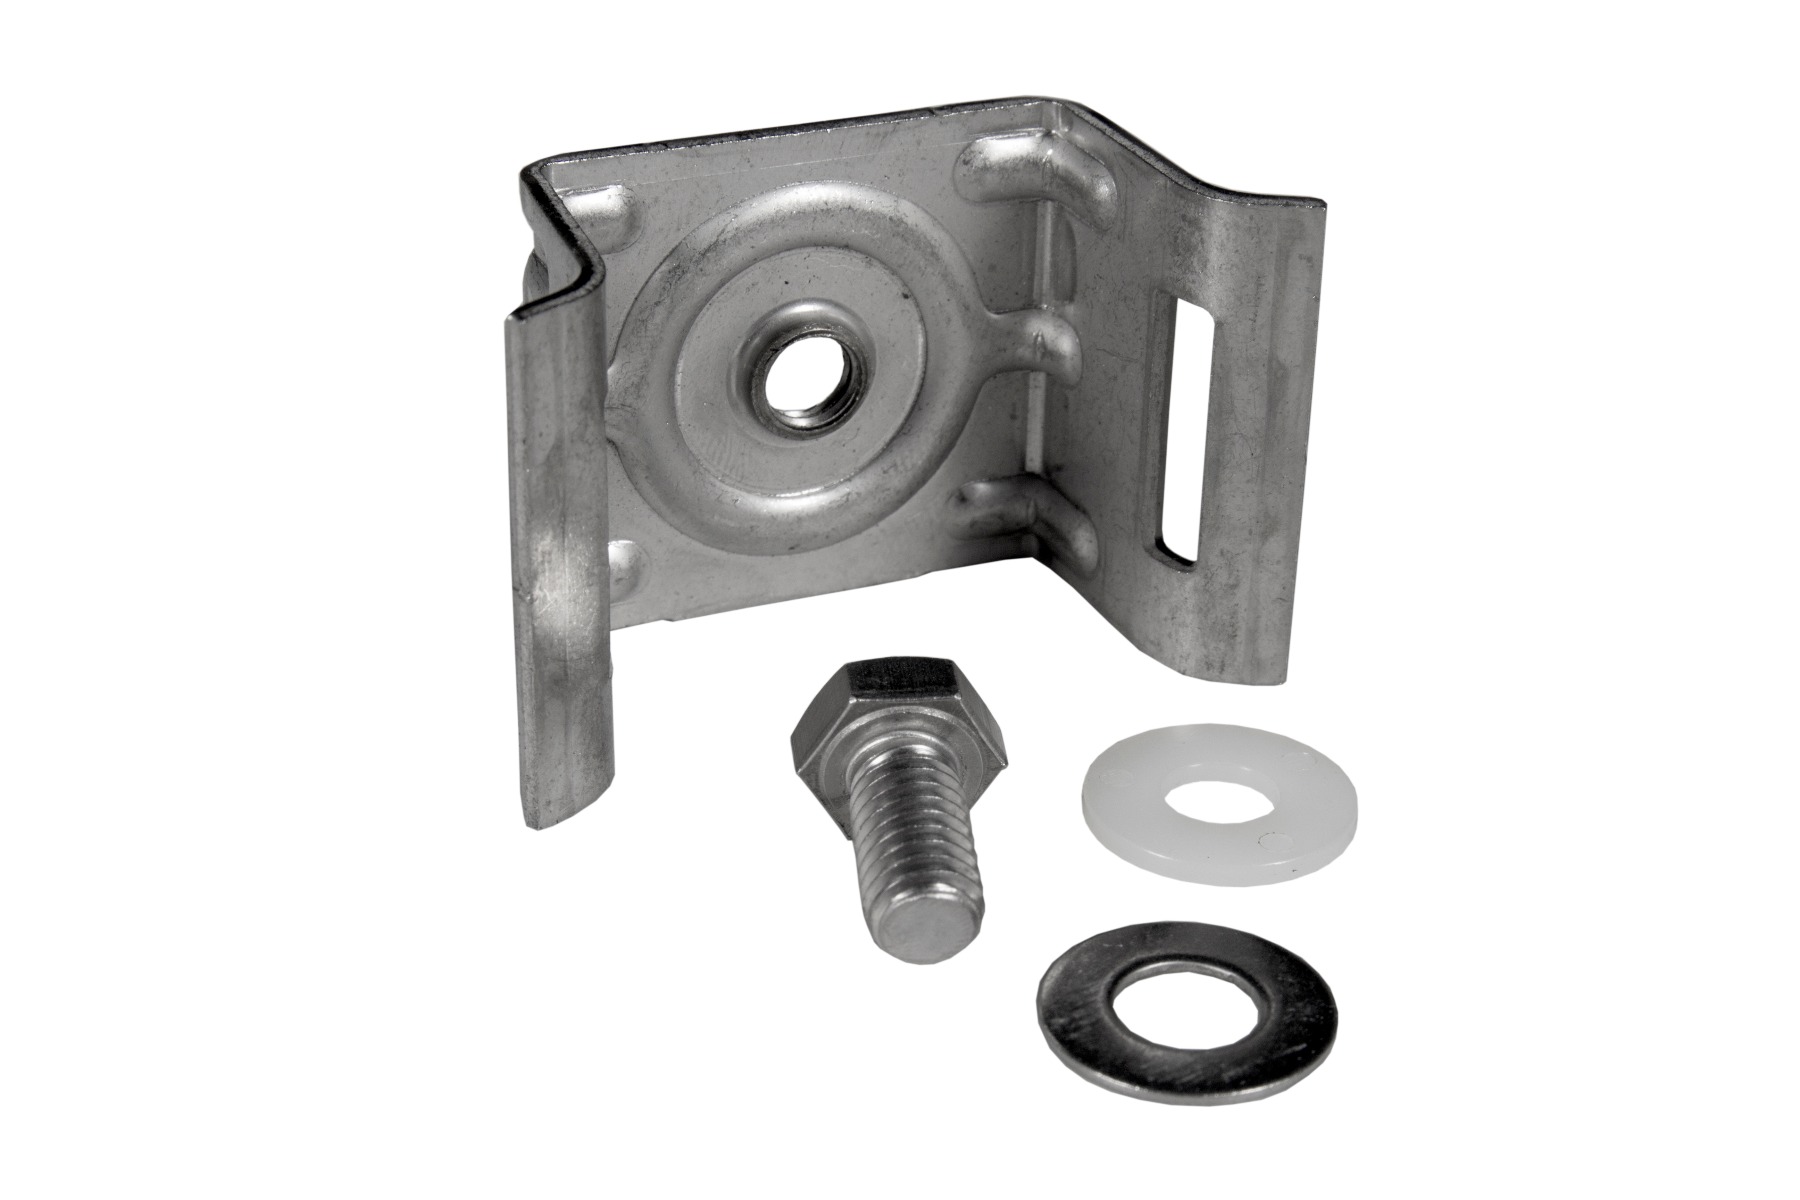 Flared Leg Sign Bracket with SS Bolt and Washer from Columbia Safety